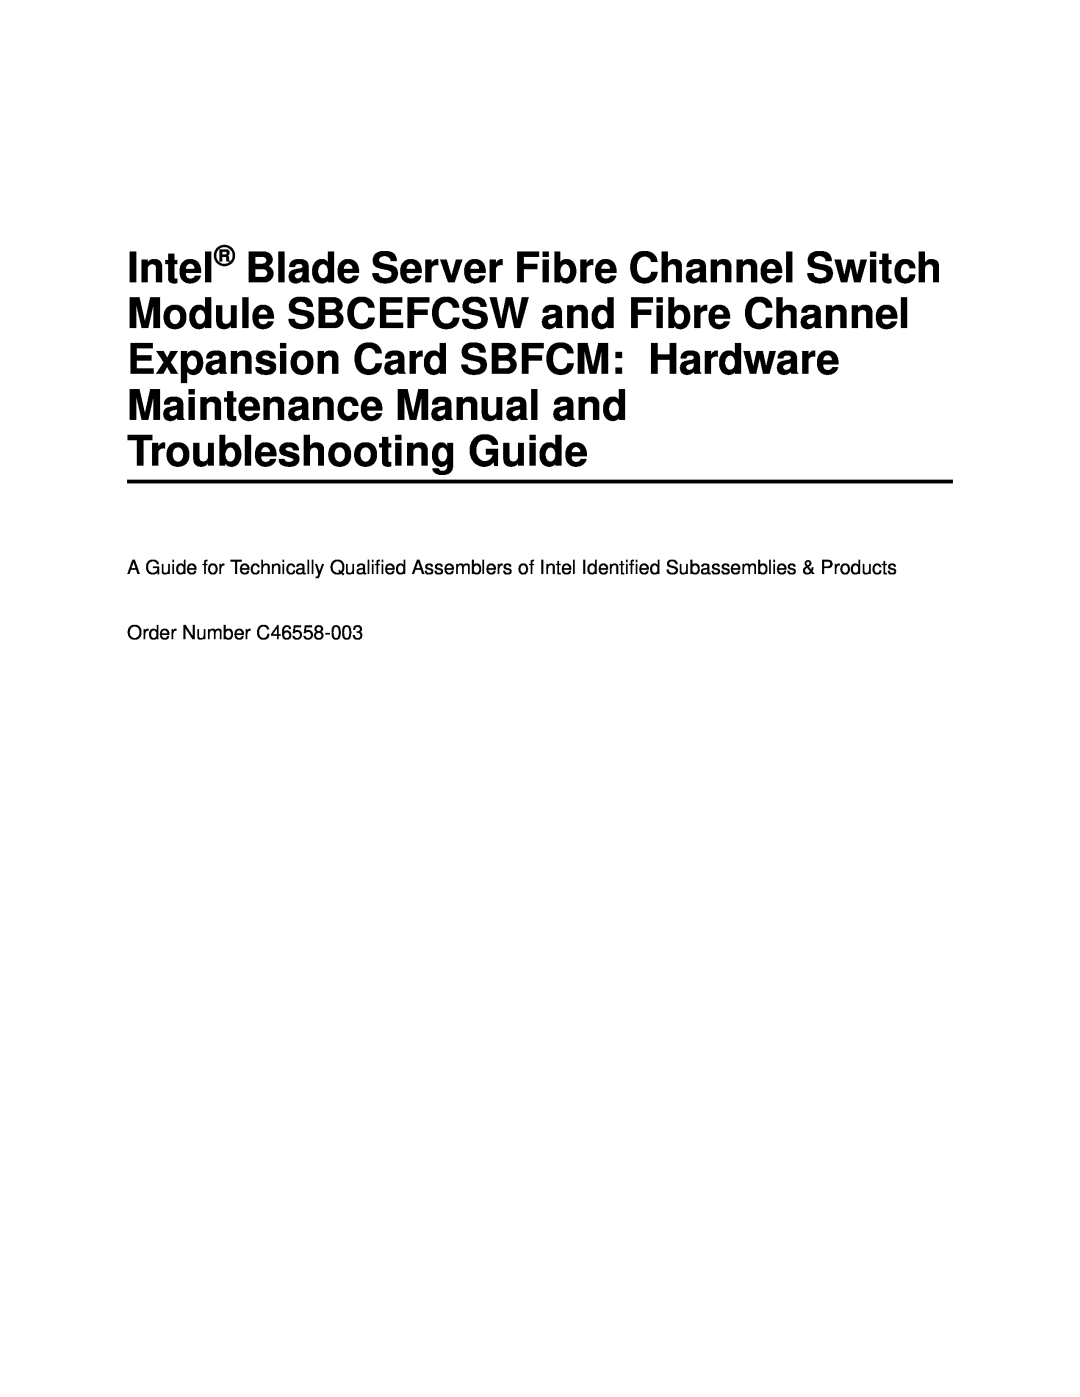 Intel manual Intel Blade Server Switch Module, SBCEFCSW Management and User’s Guide, Order Number C39671-003 